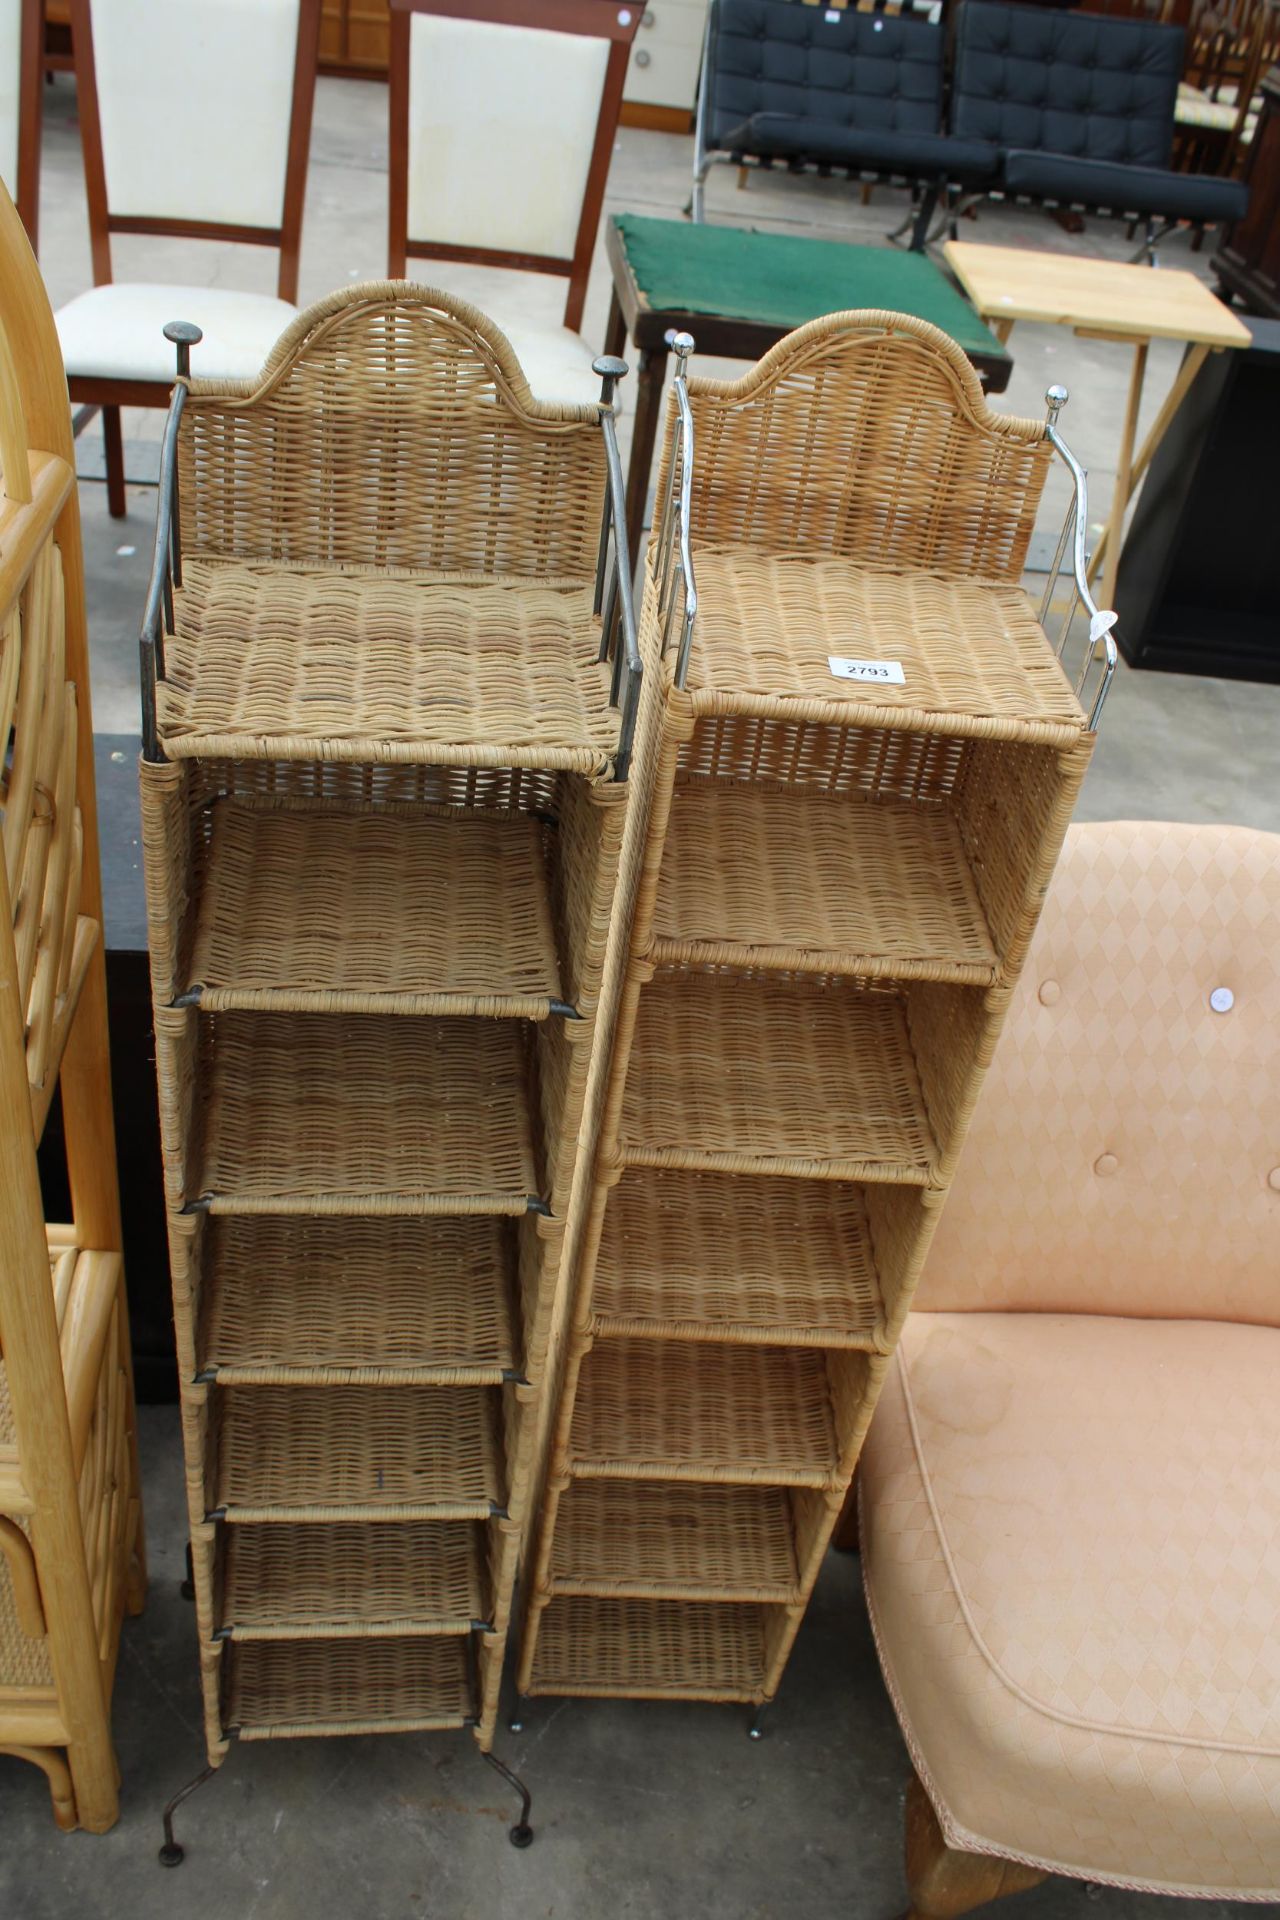 A WICKER AND BAMBOO DOMED TOP OPEN SHELF AND TWO WICKER STORAGE SHELVES, 8.5" WIDE - Image 2 of 2